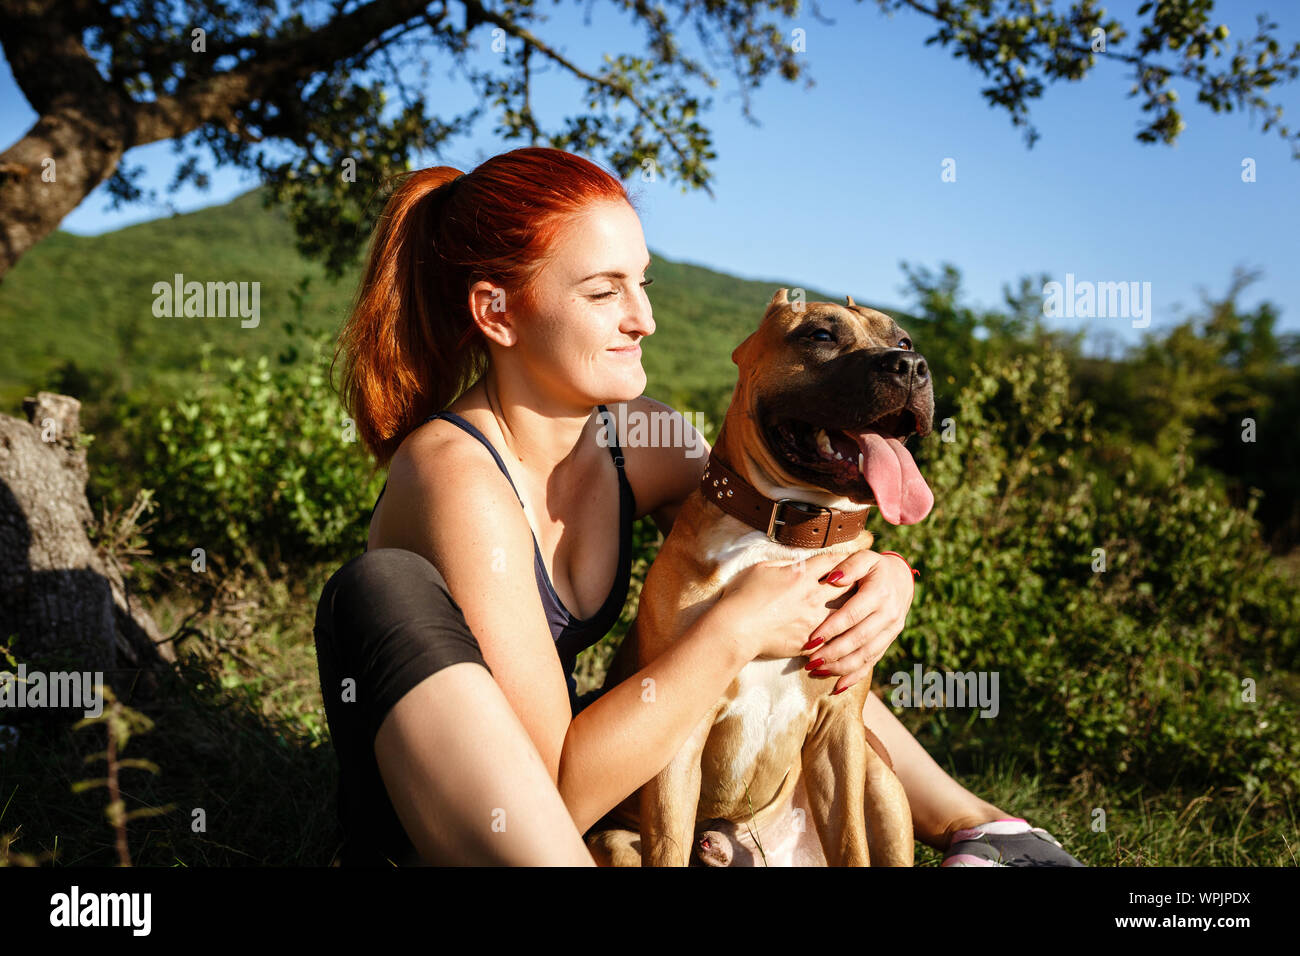 jouful young girl caressing their dog, wearing sport clothing, enjoying their time and vacation in sunny park Stock Photo